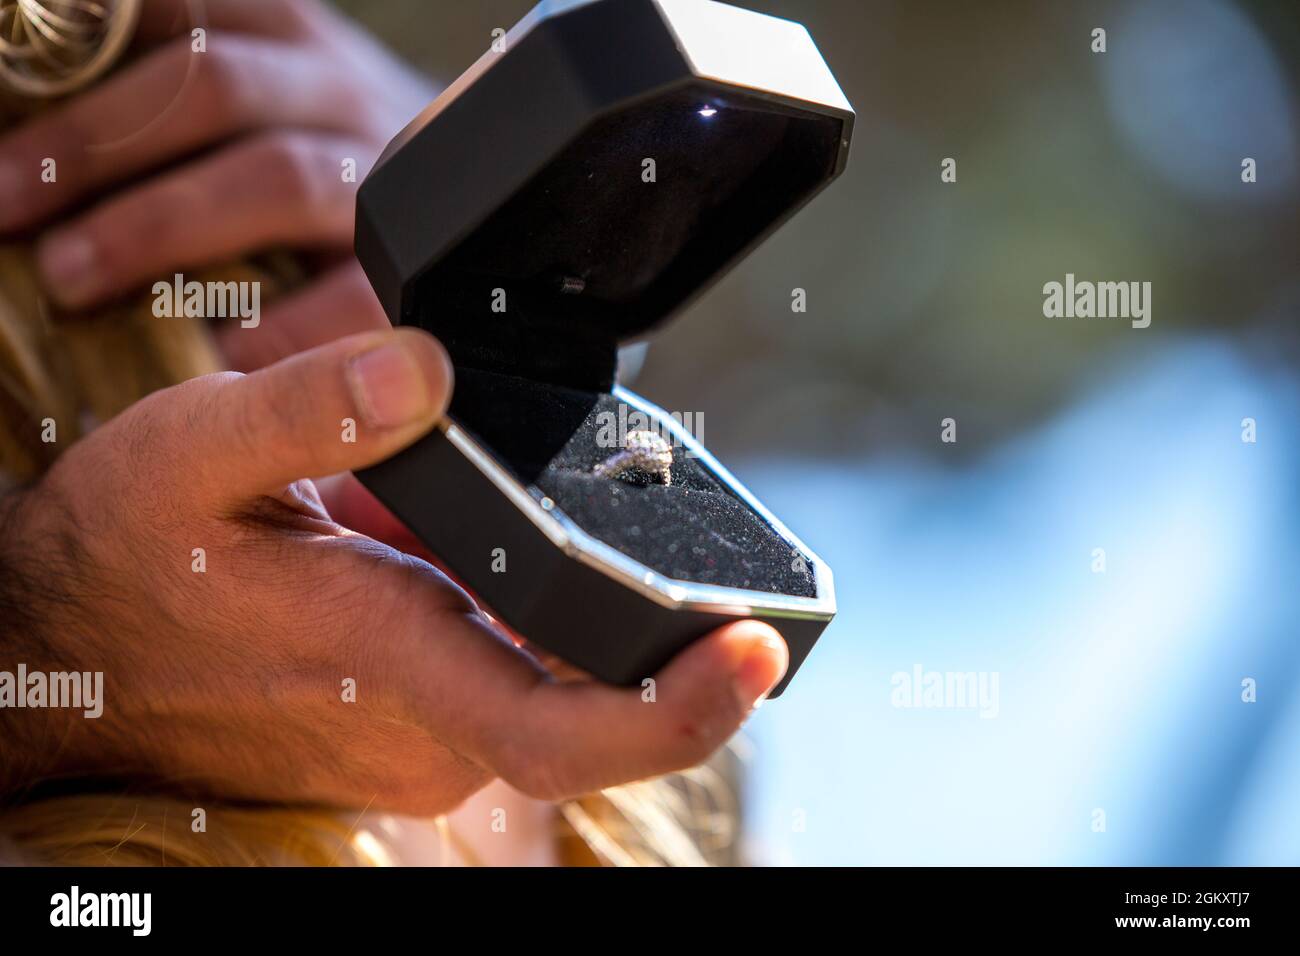 Wedding ring with diamonds in black elegant box. Man holds an open jewellery box with expensive proposal ring Stock Photo